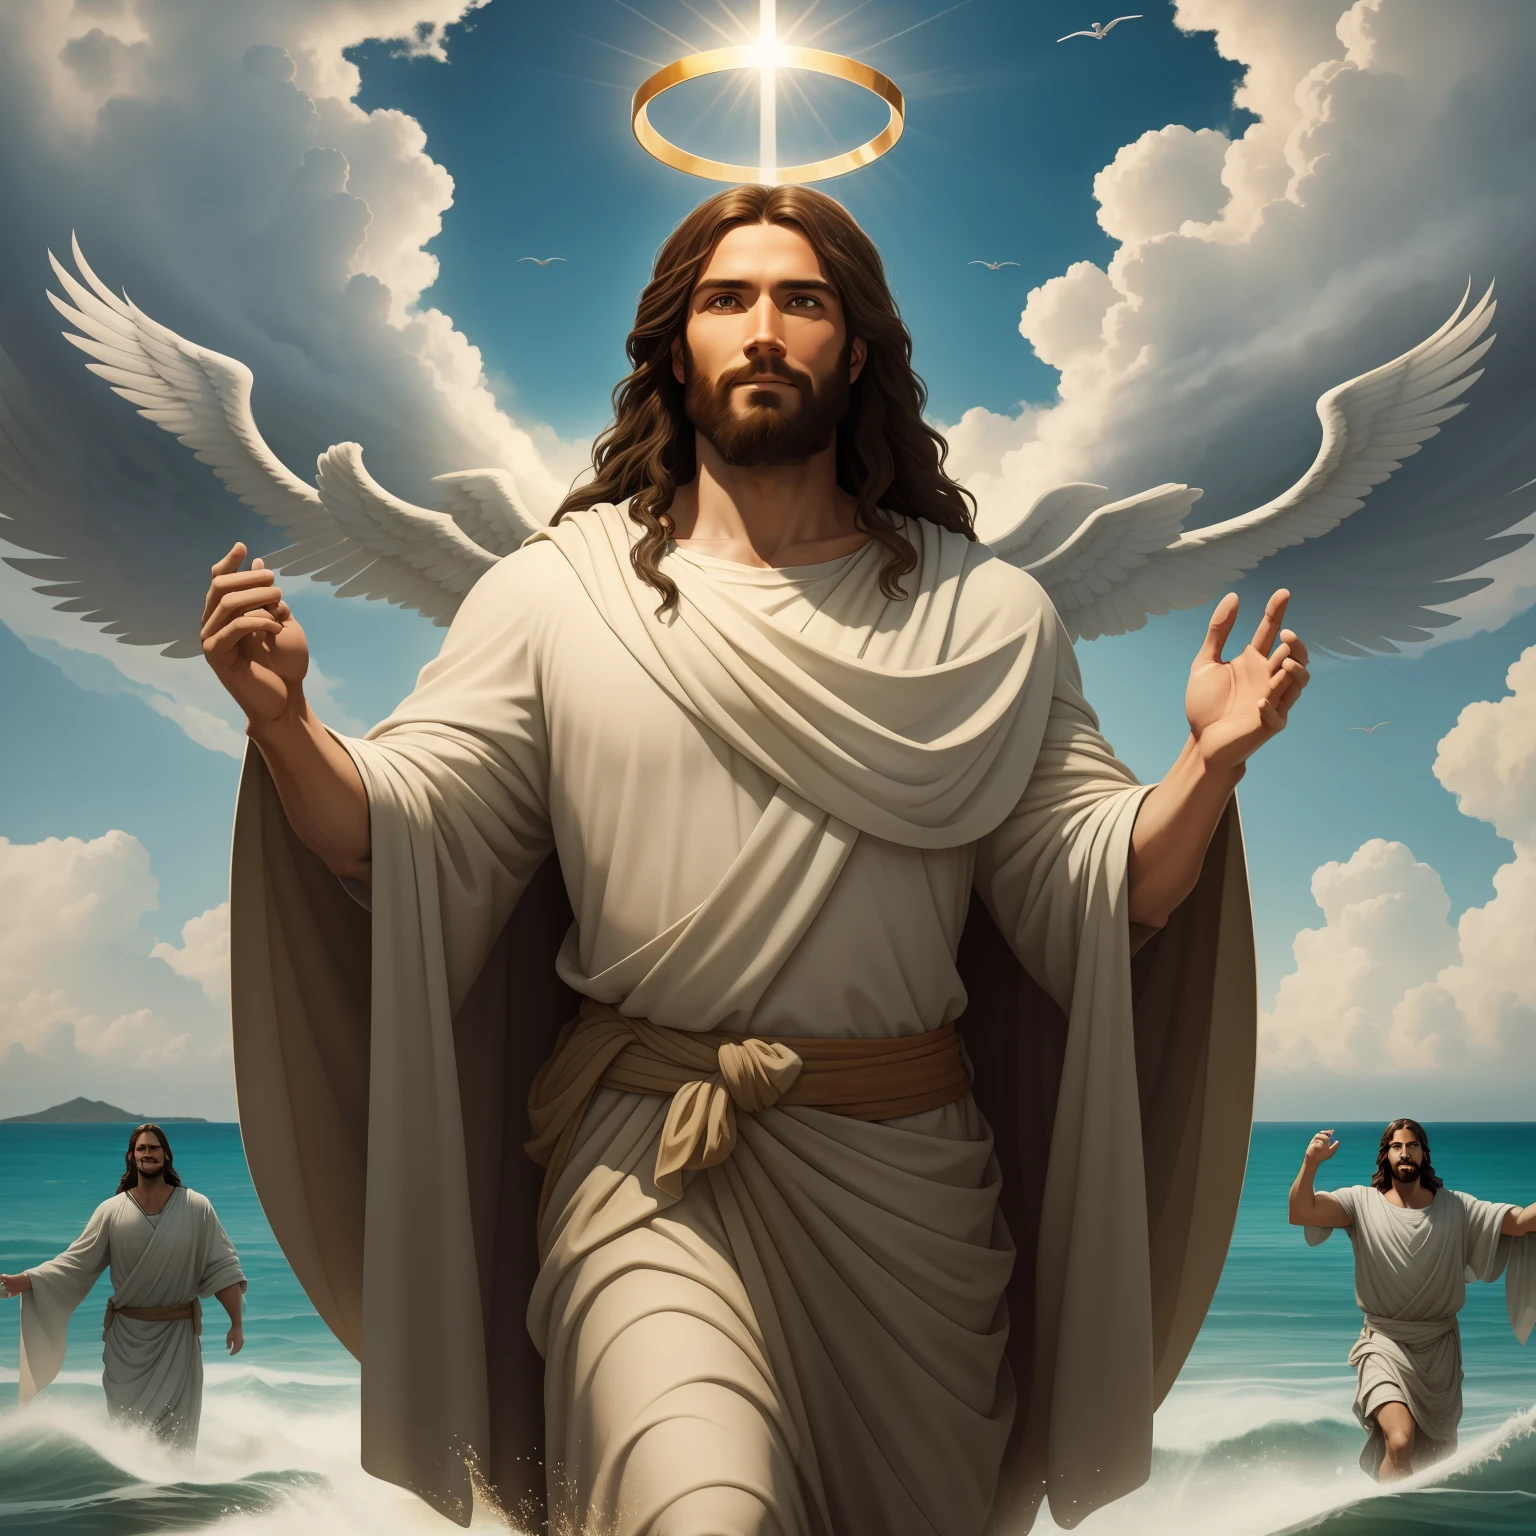 Jesus walking on water with a flying cloud in the background, Jesus walking on water, biblical illustration, epic biblical representation, forcing him to flee, coming out of the ocean, ! holding in hand!, disembarking, god of the ocean, beautiful representation, 8k 3D Model, realistic,
a 3D Realistic of jesus with a halo in the sky, jesus christ, smiling in heaven, portrait of jesus christ, jesus face, 33 young almighty god, portrait of a heavenly god, greg olsen, gigachad jesus, jesus of nazareth, jesus, the face of god, god looking at me, he is greeting you warmly, he is happy, avatar image